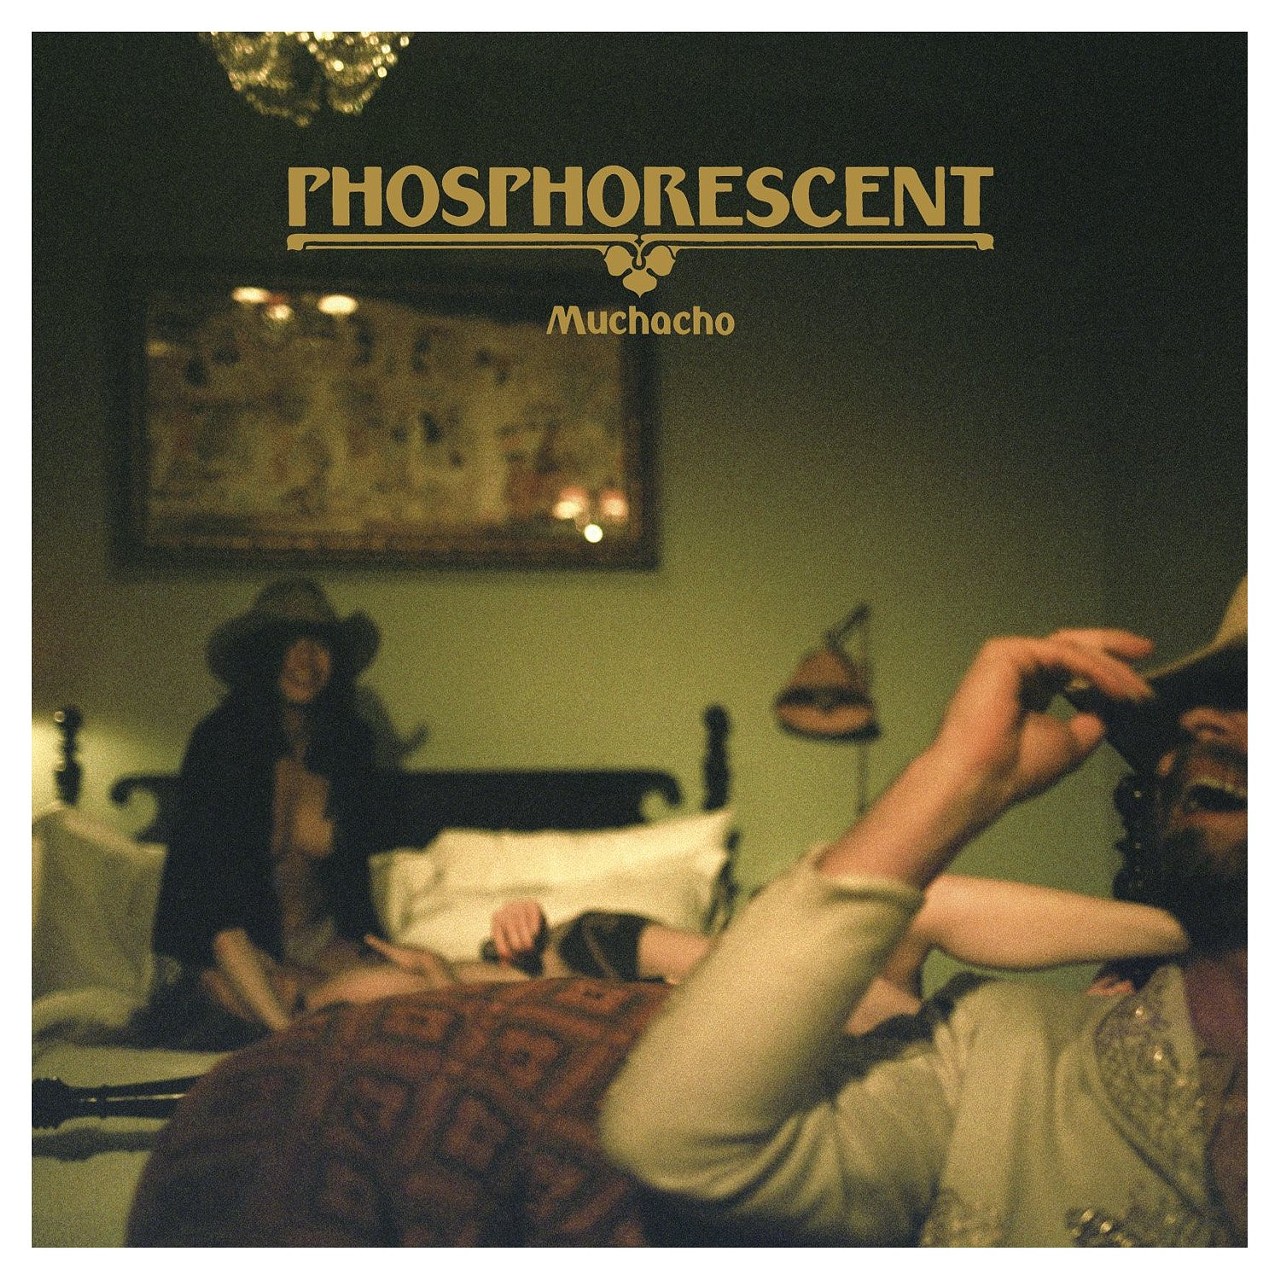 15. Phosphorescent, "Song for Zula" (23 Votes)